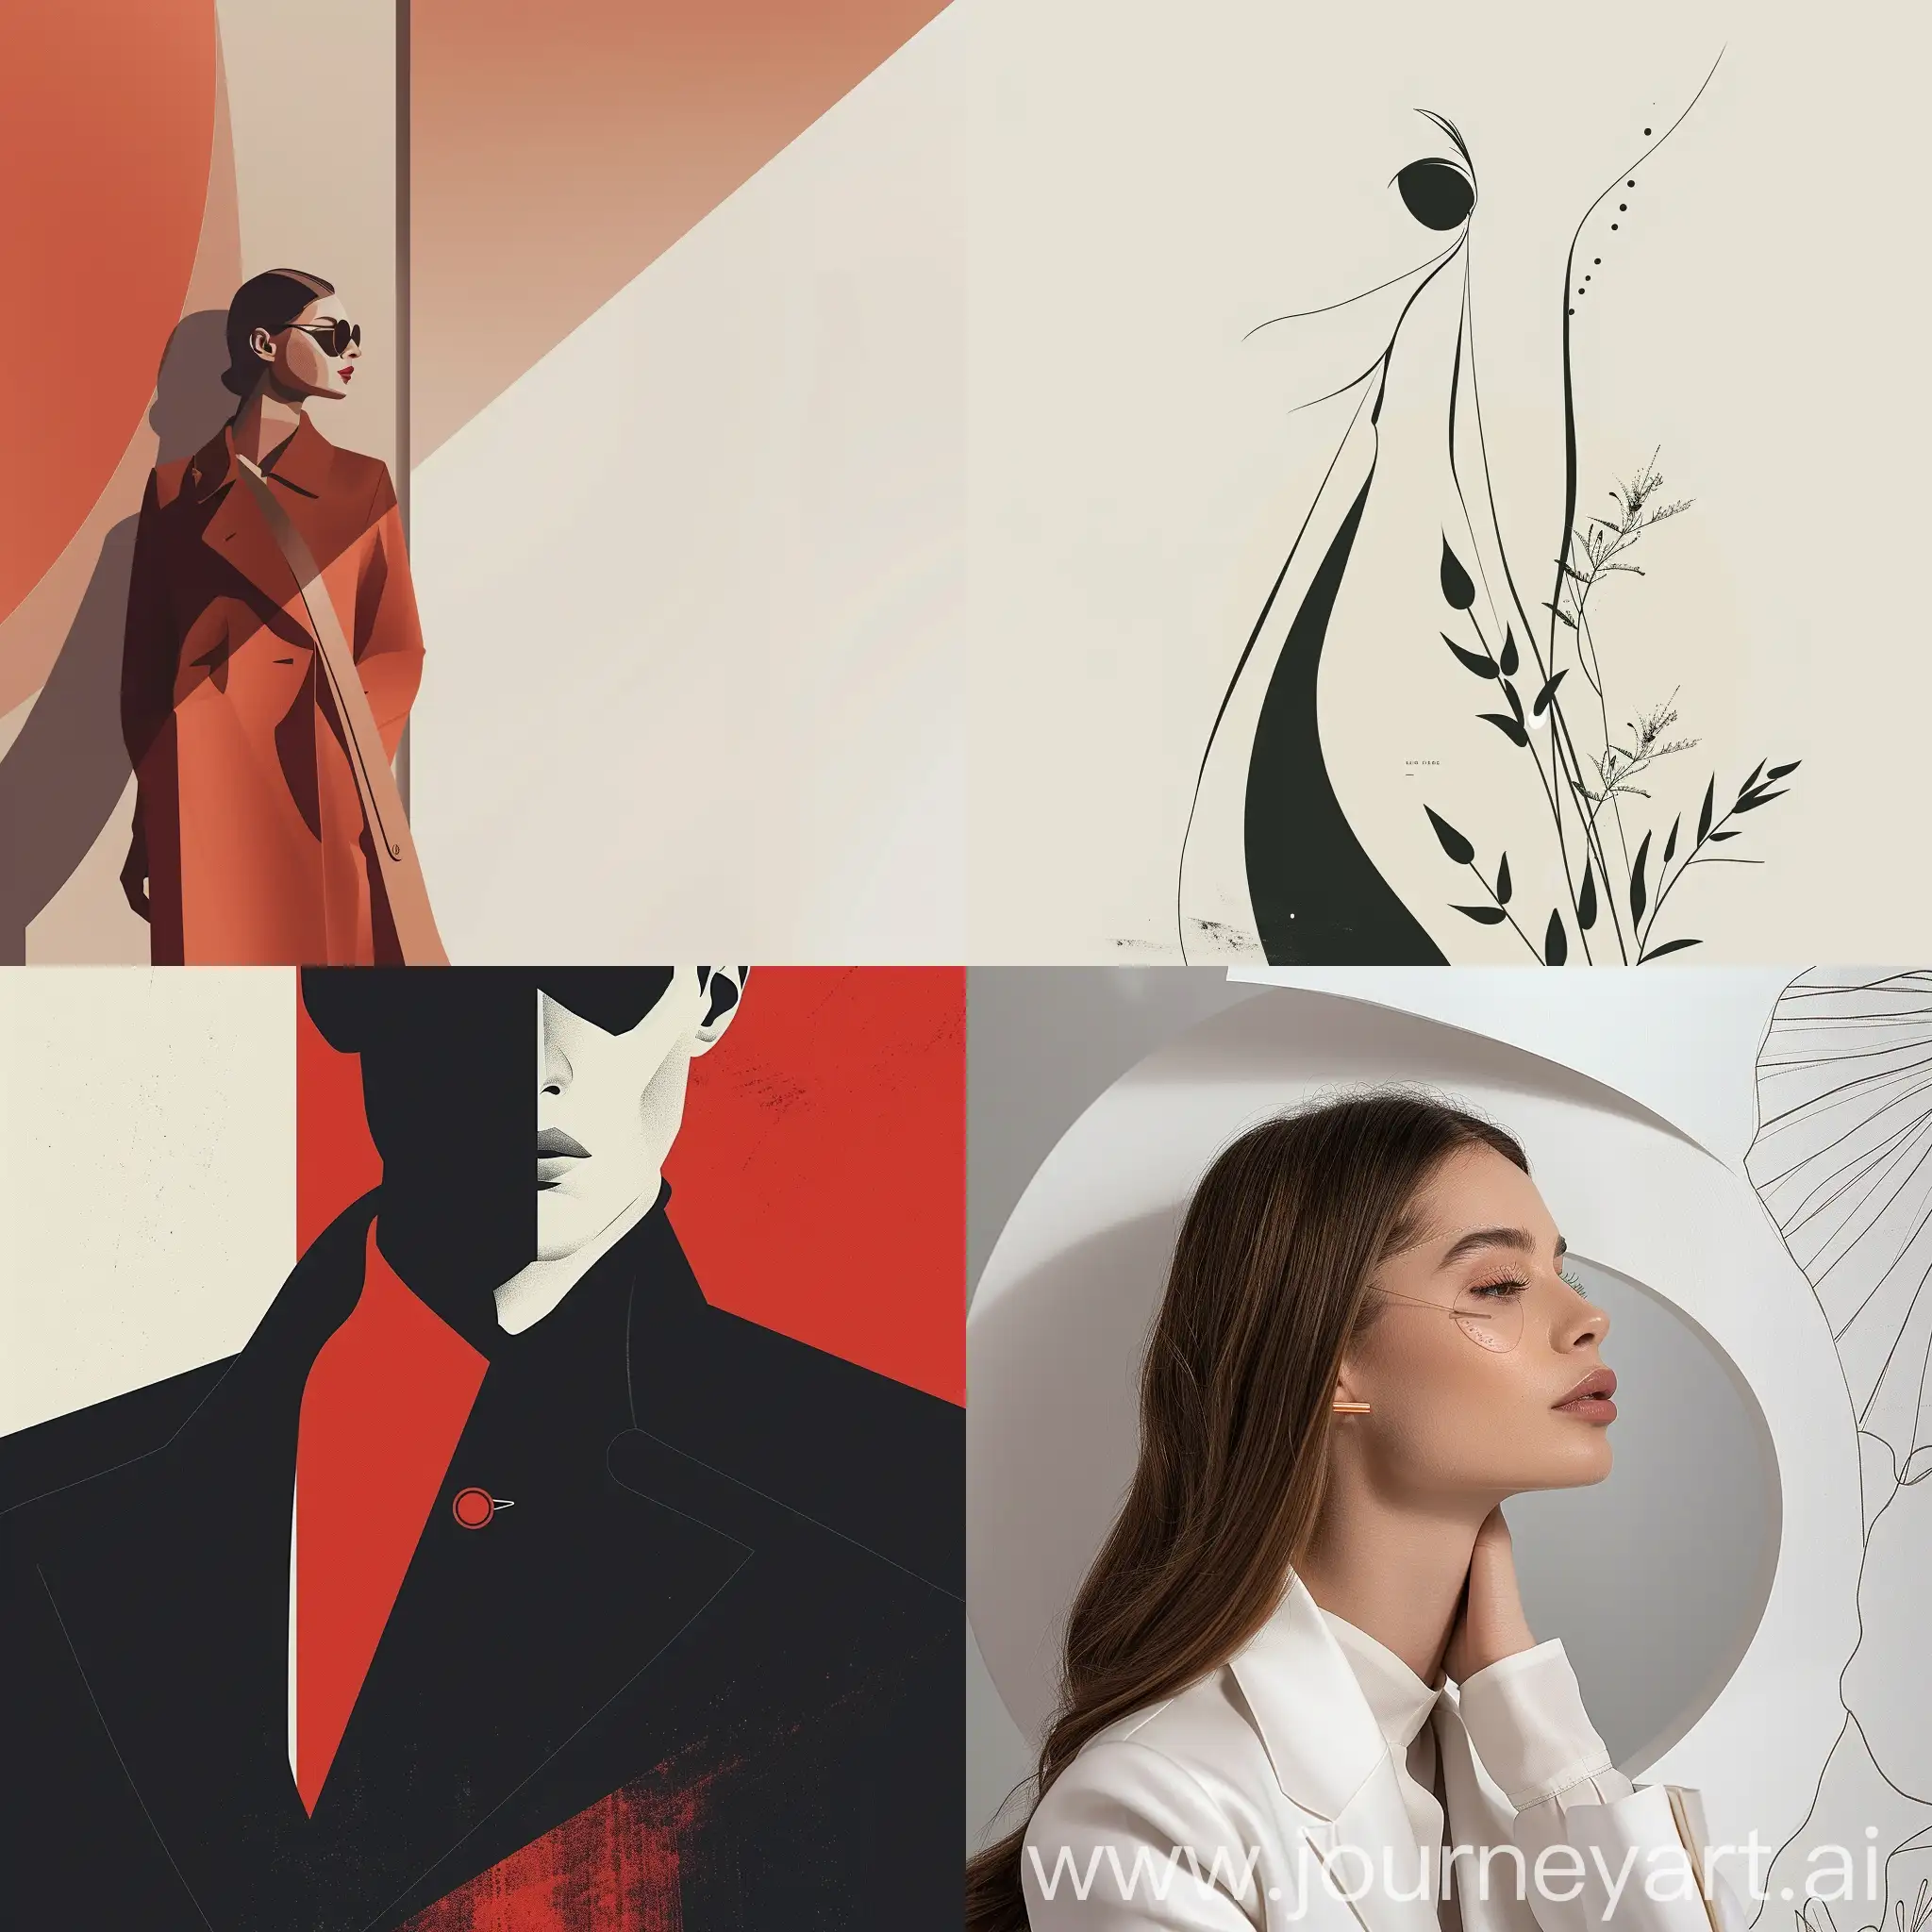 Timelessly-Chic-Minimalist-Fashion-Brand-Launch-Poster